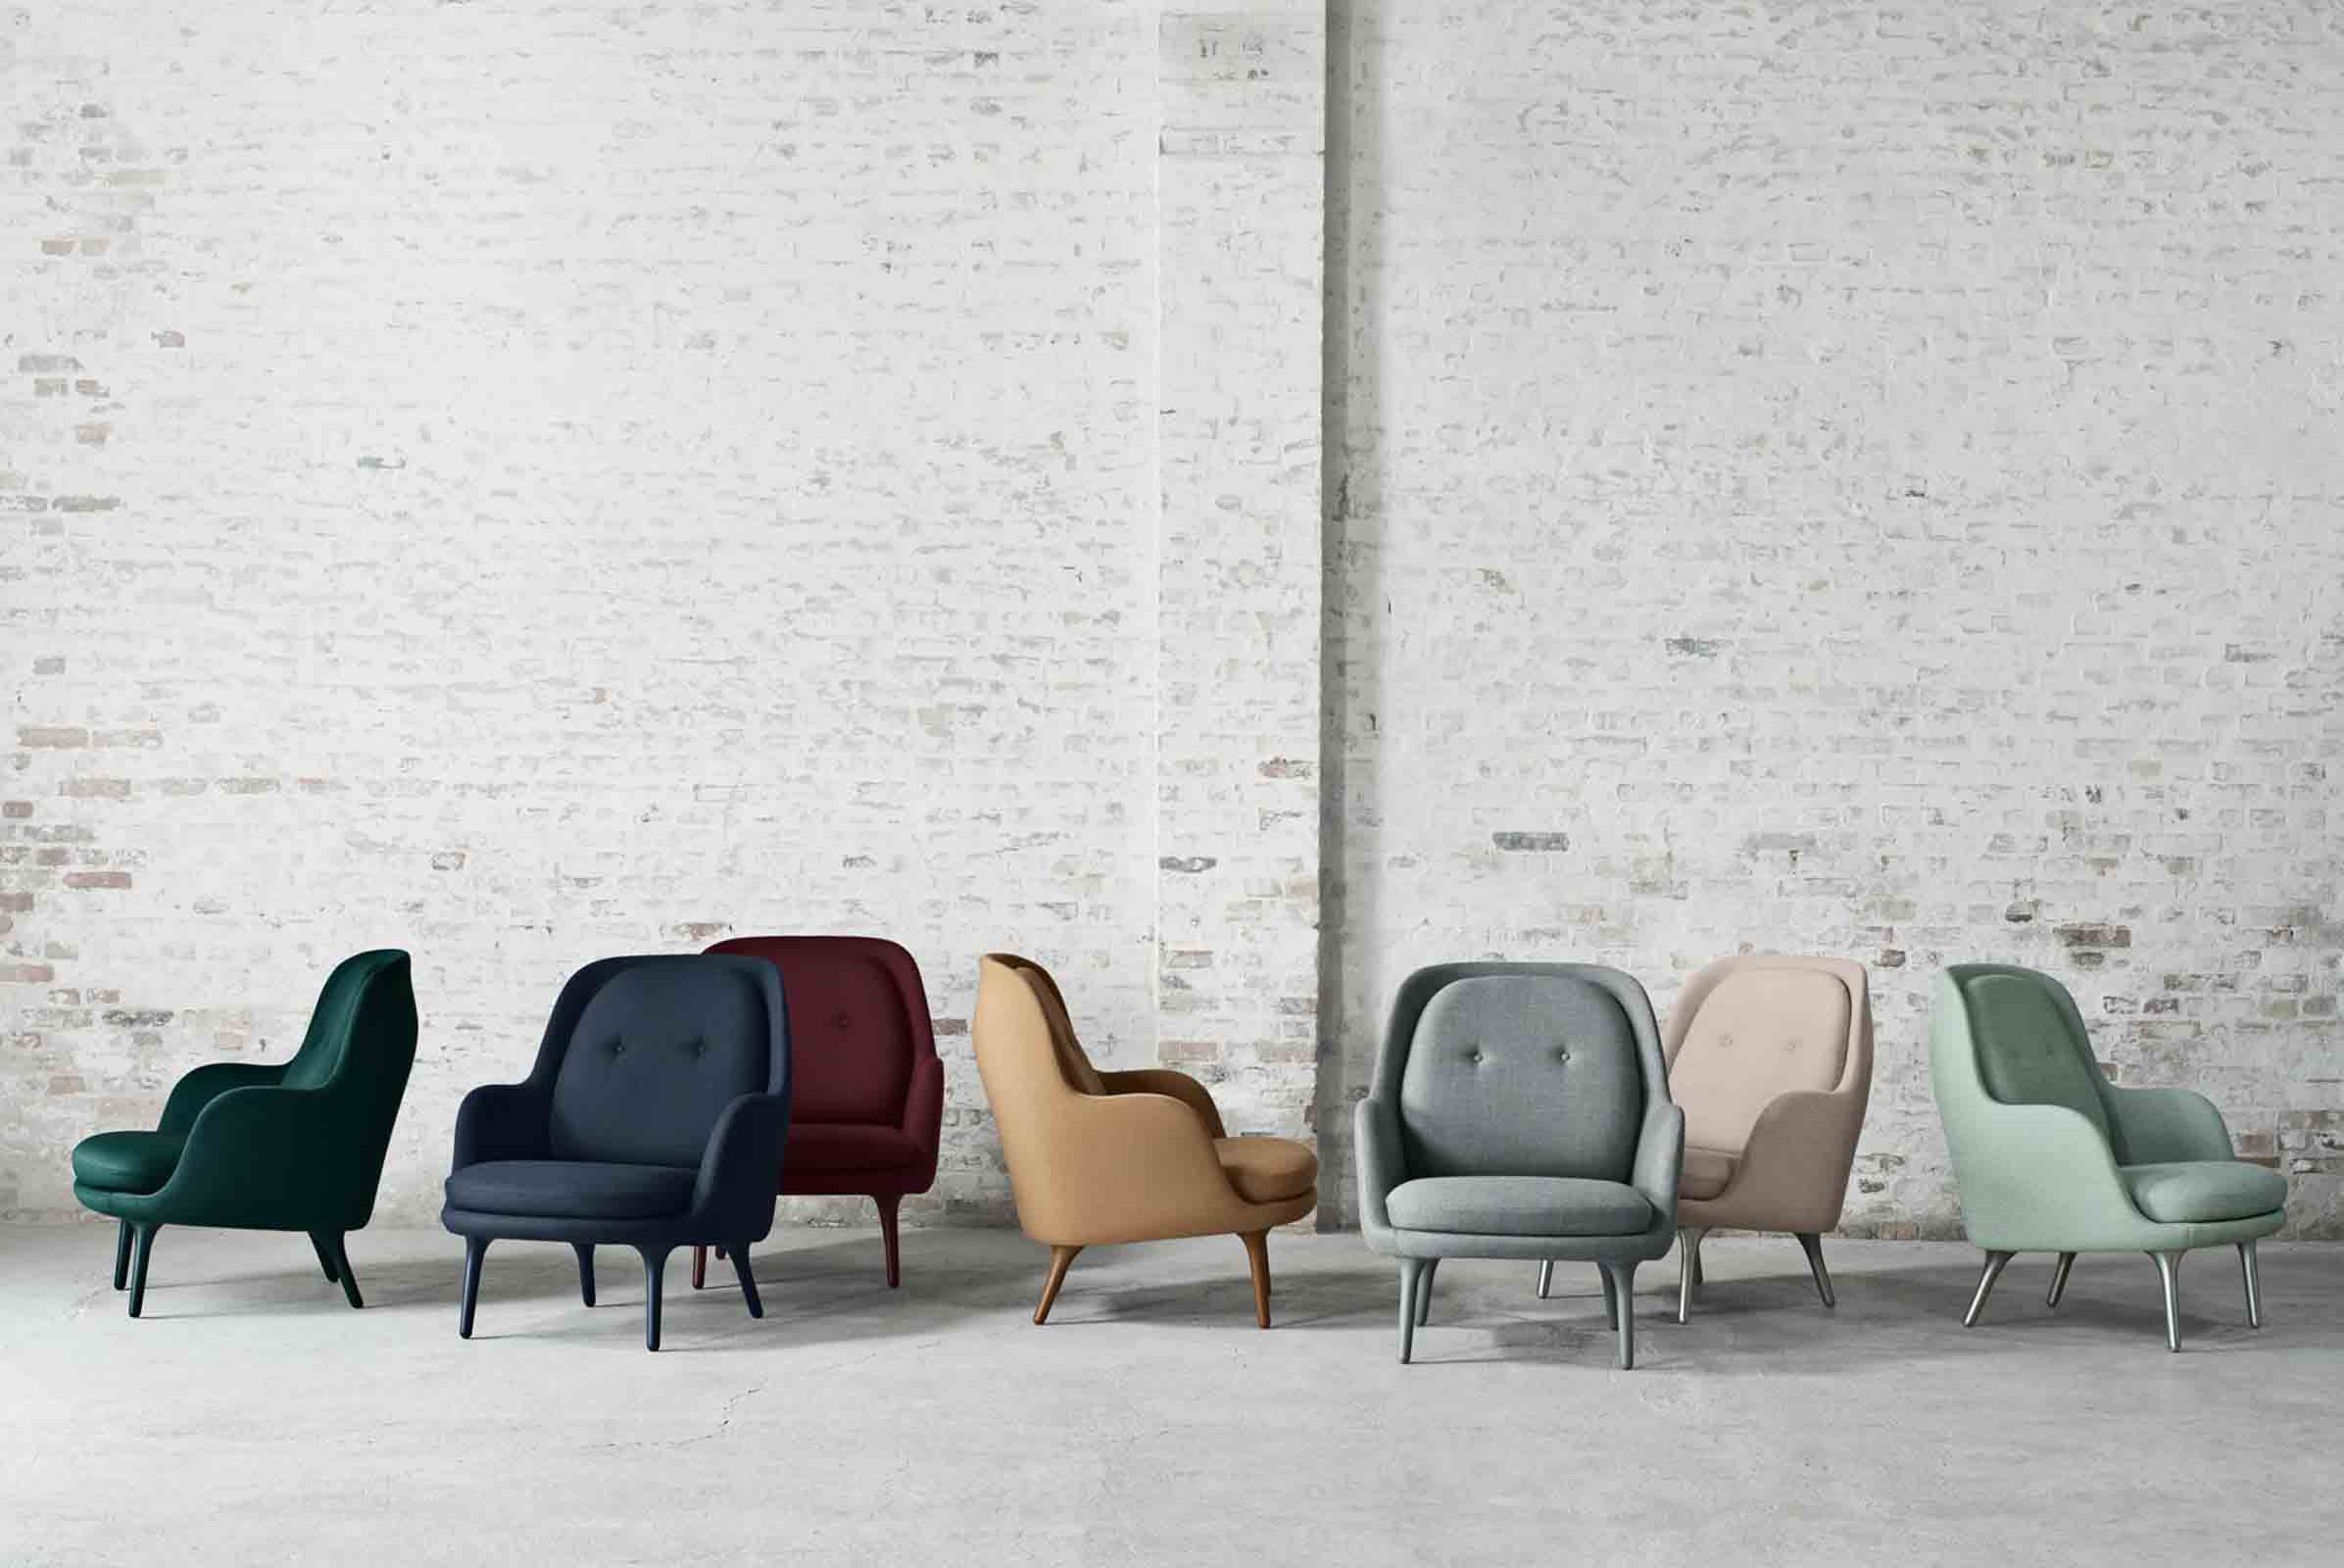 ‘Fri’ chair in multiple colours, designed by  Jaime Hayon for Fritz Hansen